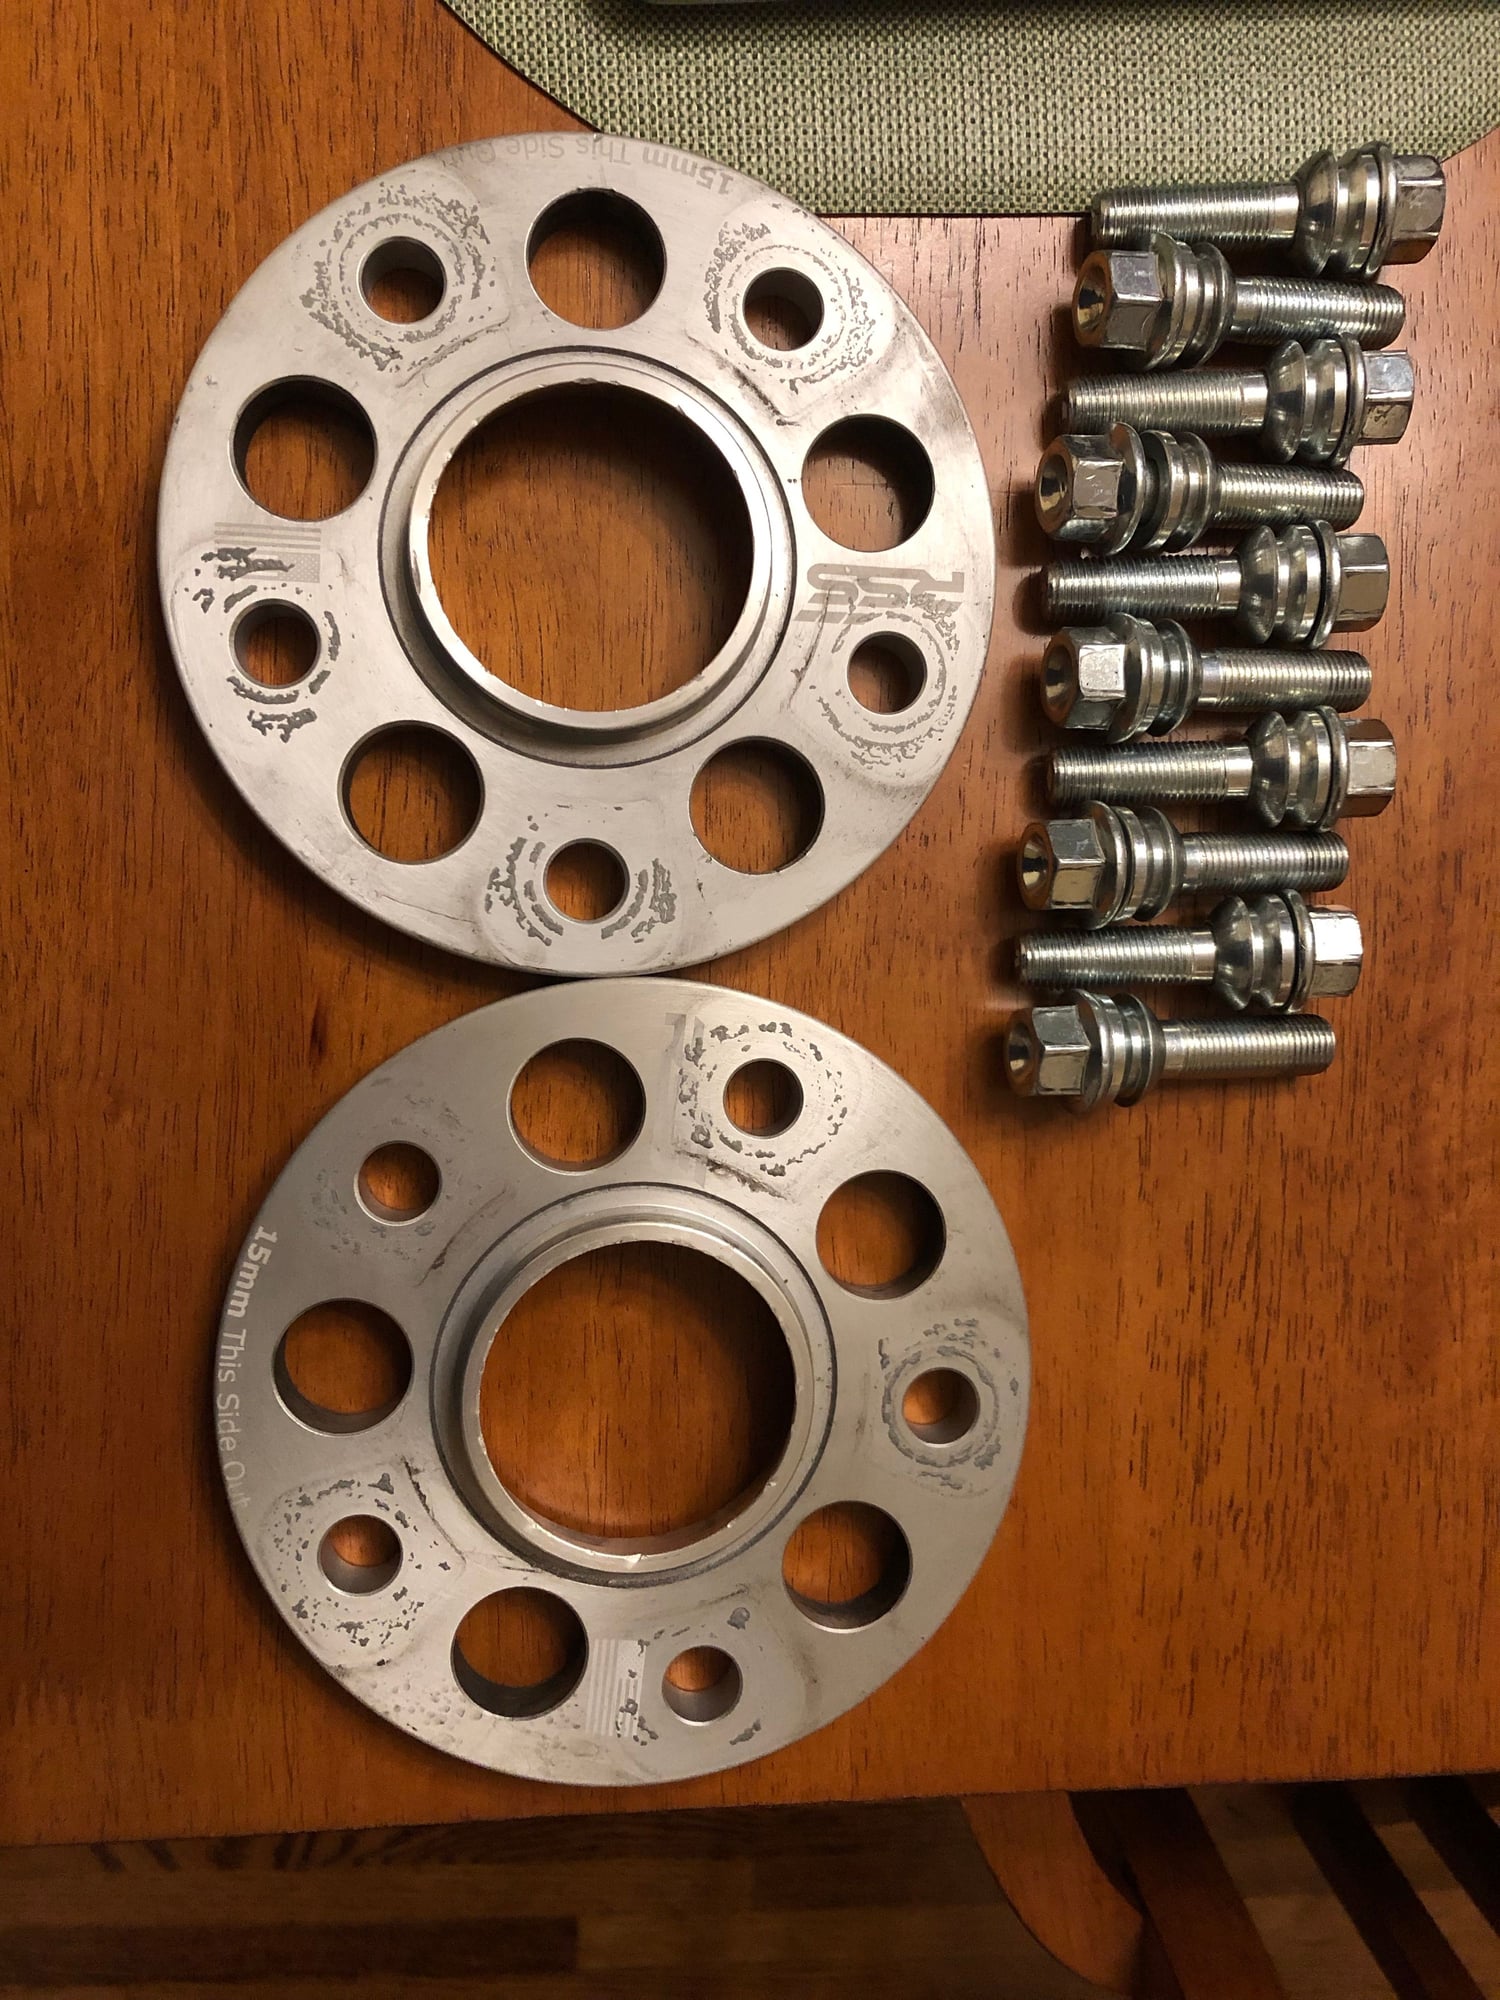 Wheels and Tires/Axles - 2 RSS 15mm Hubcentric Spacers with 10 Bolts shipped to your door for $130!! - Used - Pasadena, CA 91104, United States